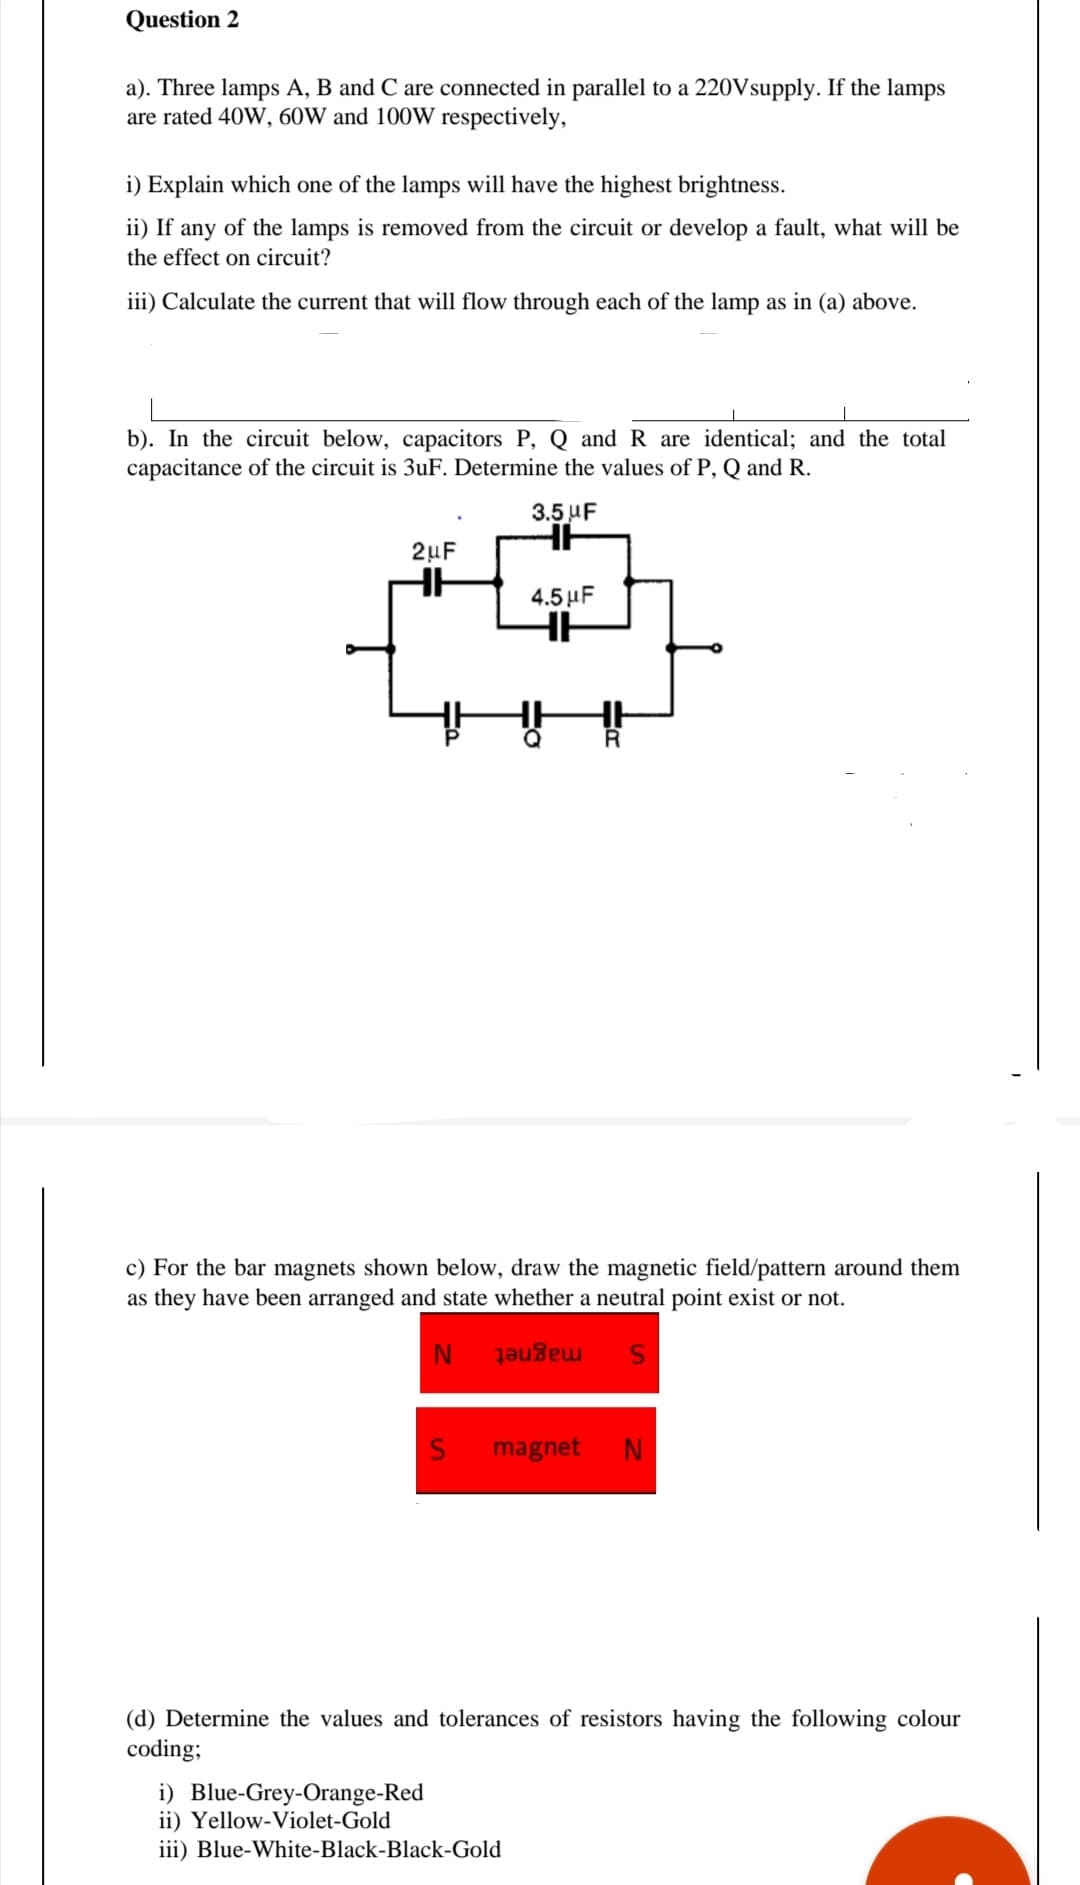 Question 2
a). Three lamps A, B and C are connected in parallel to a 220Vsupply. If the lamps
are rated 40W, 60W and 100W respectively,
i) Explain which one of the lamps will have the highest brightness.
ii) If any of the lamps is removed from the circuit or develop a fault, what will be
the effect on circuit?
iii) Calculate the current that will flow through each of the lamp as in (a) above.
b). In the circuit below, capacitors P, Q and R are identical; and the total
capacitance of the circuit is 3uF. Determine the values of P, Q and R.
3.5 UF
2µF
4.5 µF
c) For the bar magnets shown below, draw the magnetic field/pattern around them
as they have been arranged and state whether a neutral point exist or not.
magnet
magnet
(d) Determine the values and tolerances of resistors having the following colour
coding;
i) Blue-Grey-Orange-Red
ii) Yellow-Violet-Gold
iii) Blue-White-Black-Black-Gold
